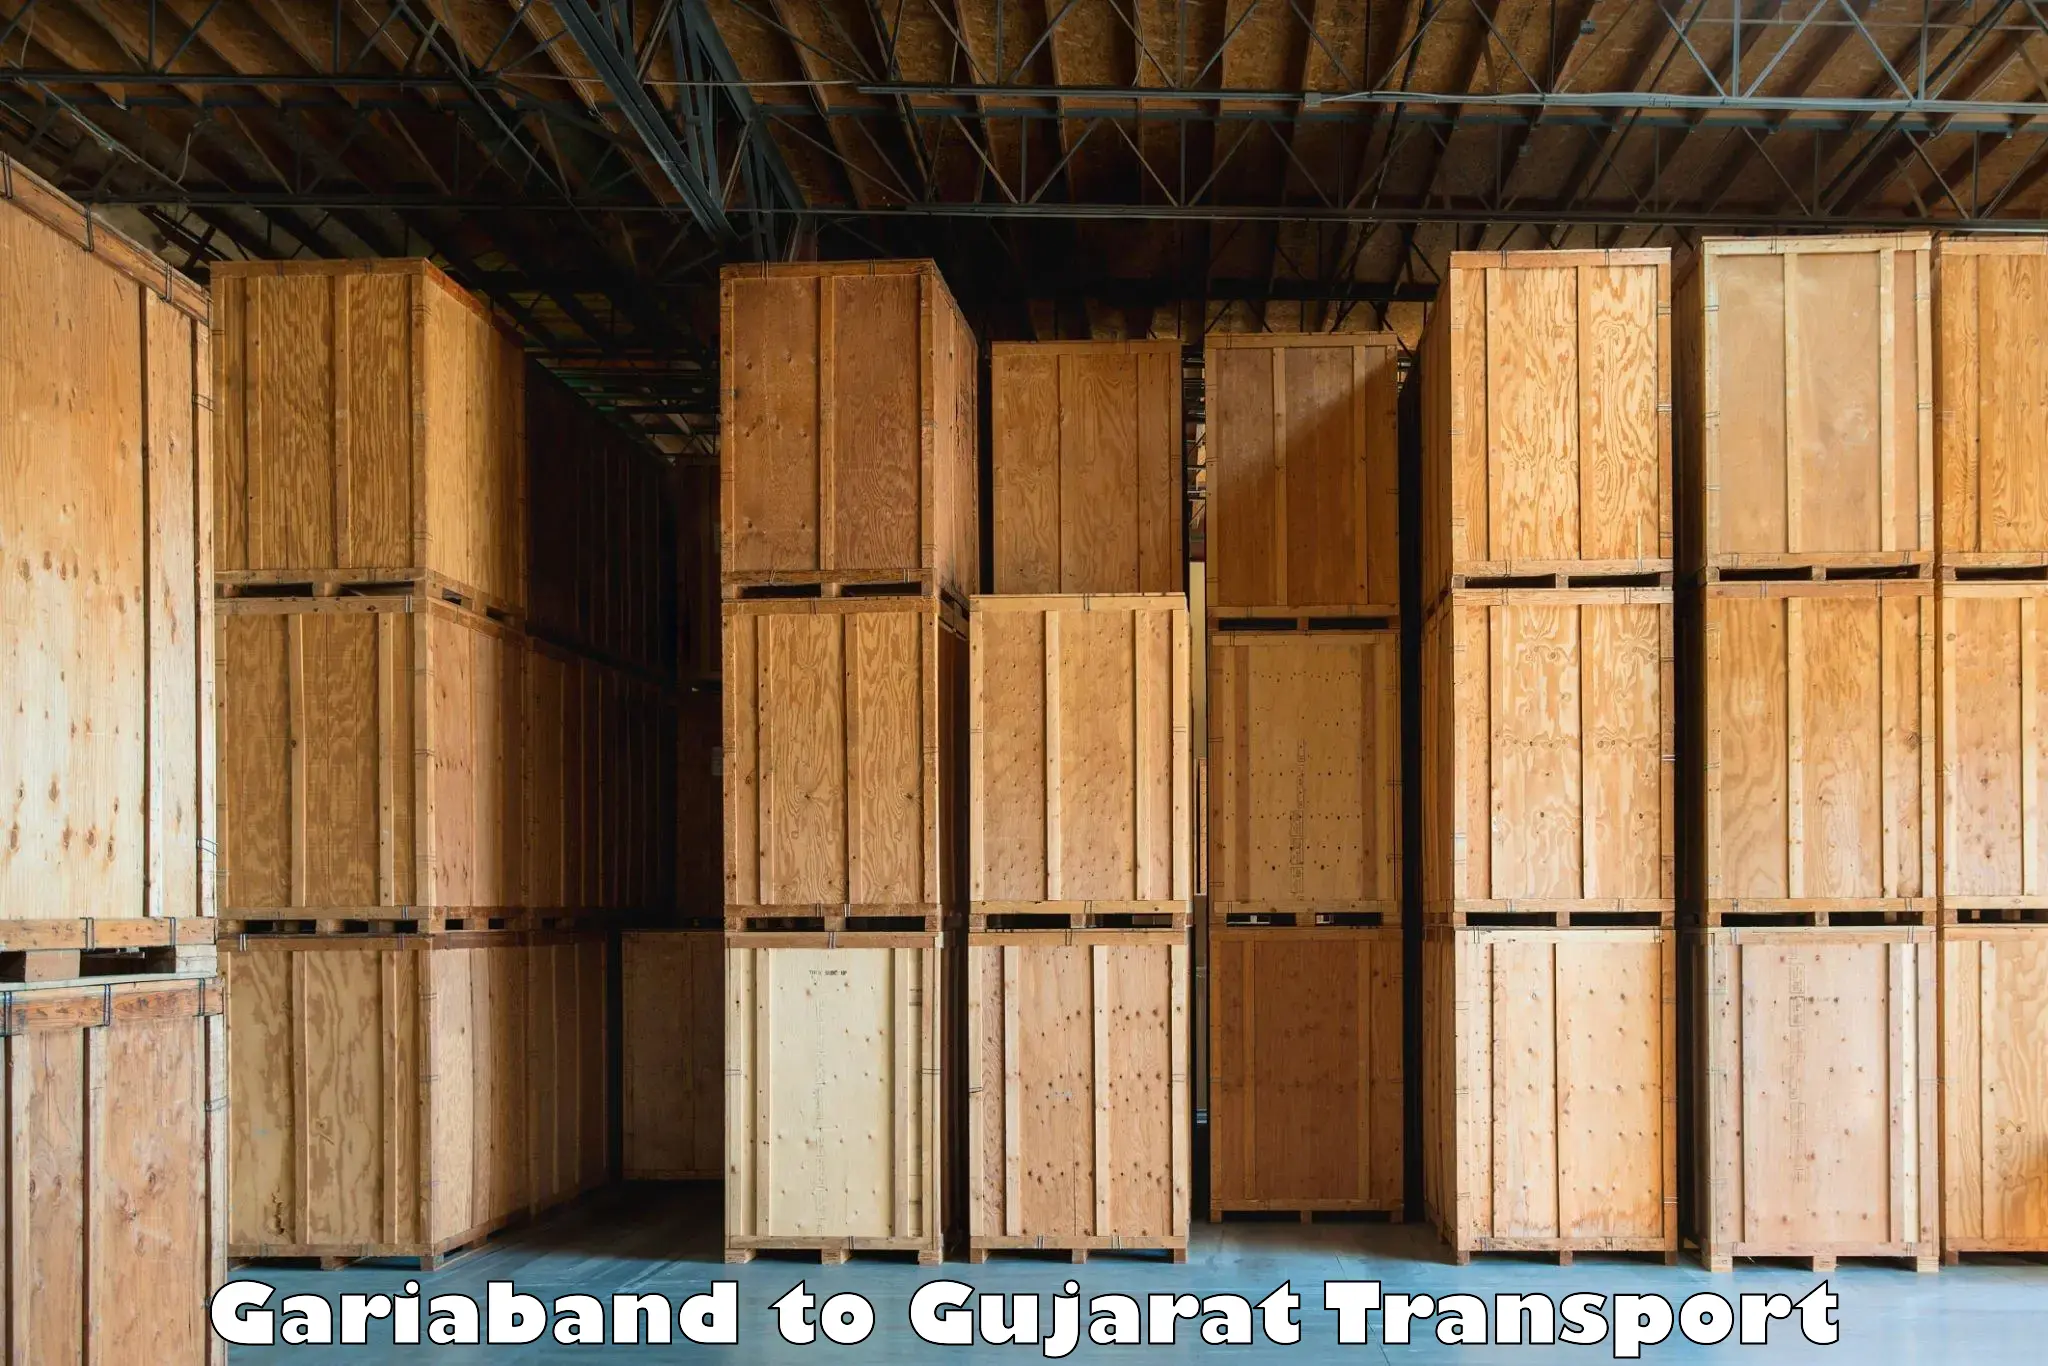 Transport shared services Gariaband to Karjan